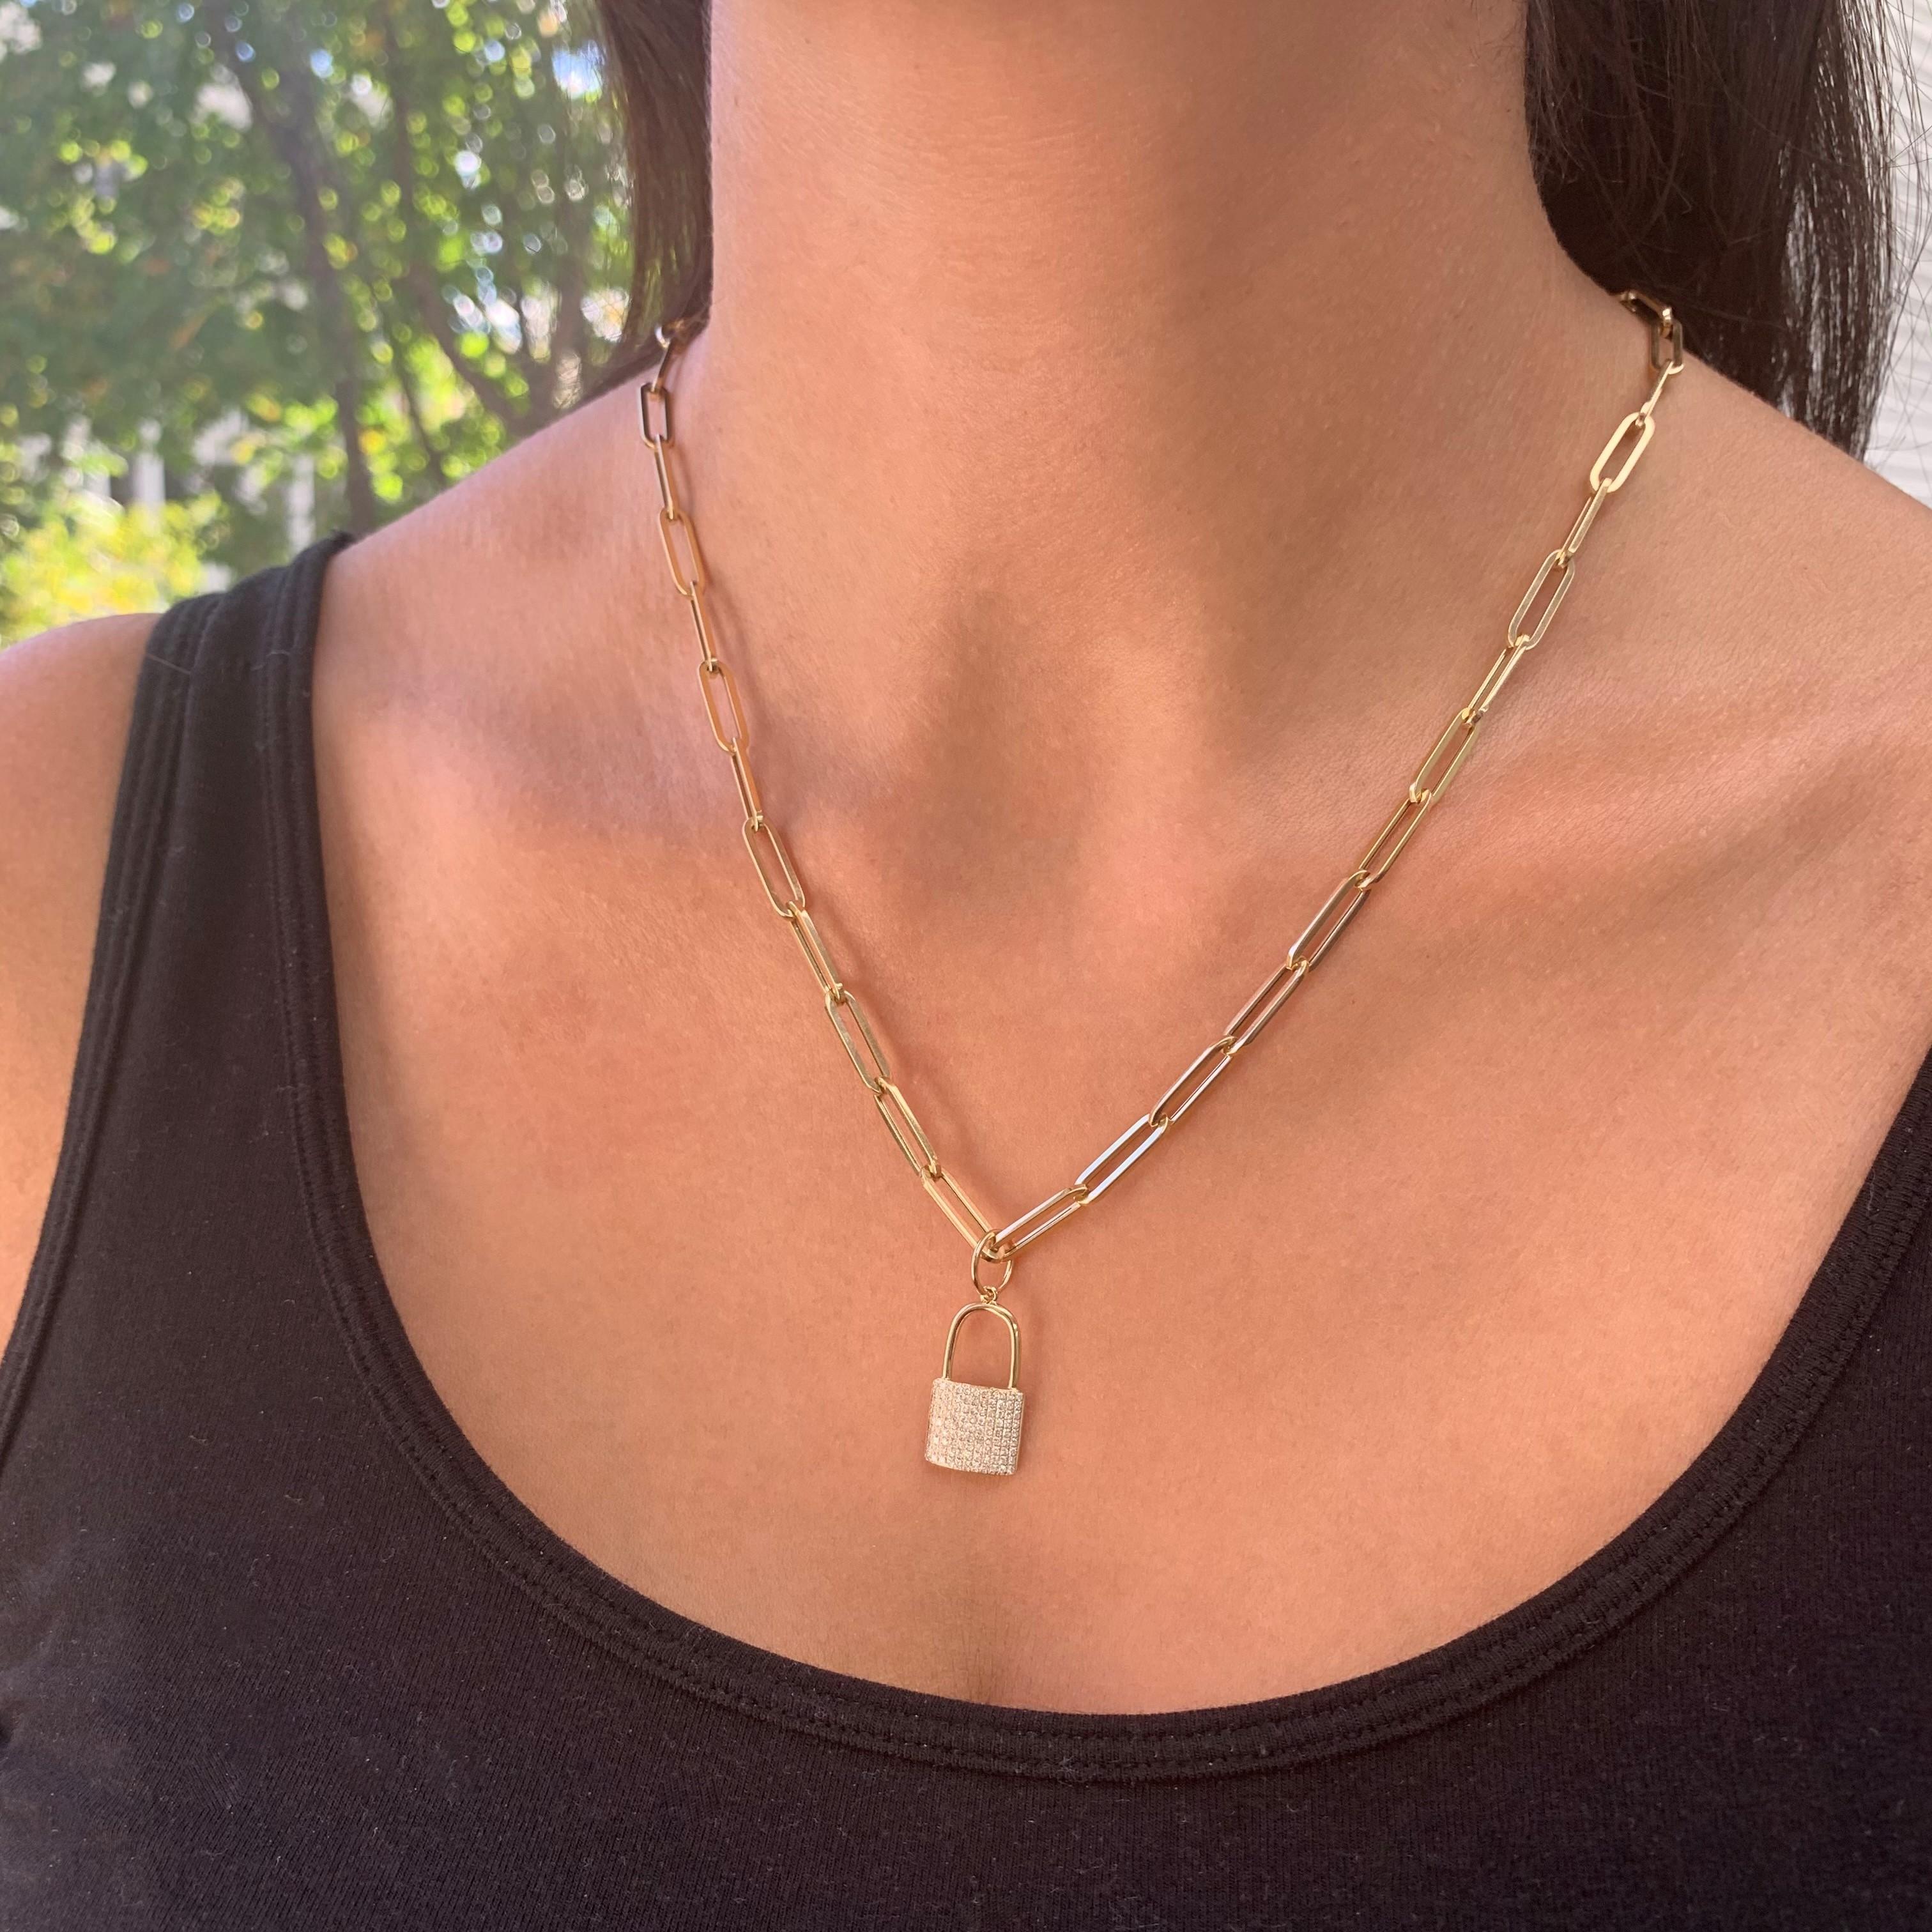  Chain necklaces are a classic staple in any person's jewelry box! This 14k gold Large Paperclip Link chain comes with plenty of options, specifically your choice of length. Buy one and wear it as a simple standalone (with or without a pendant) or